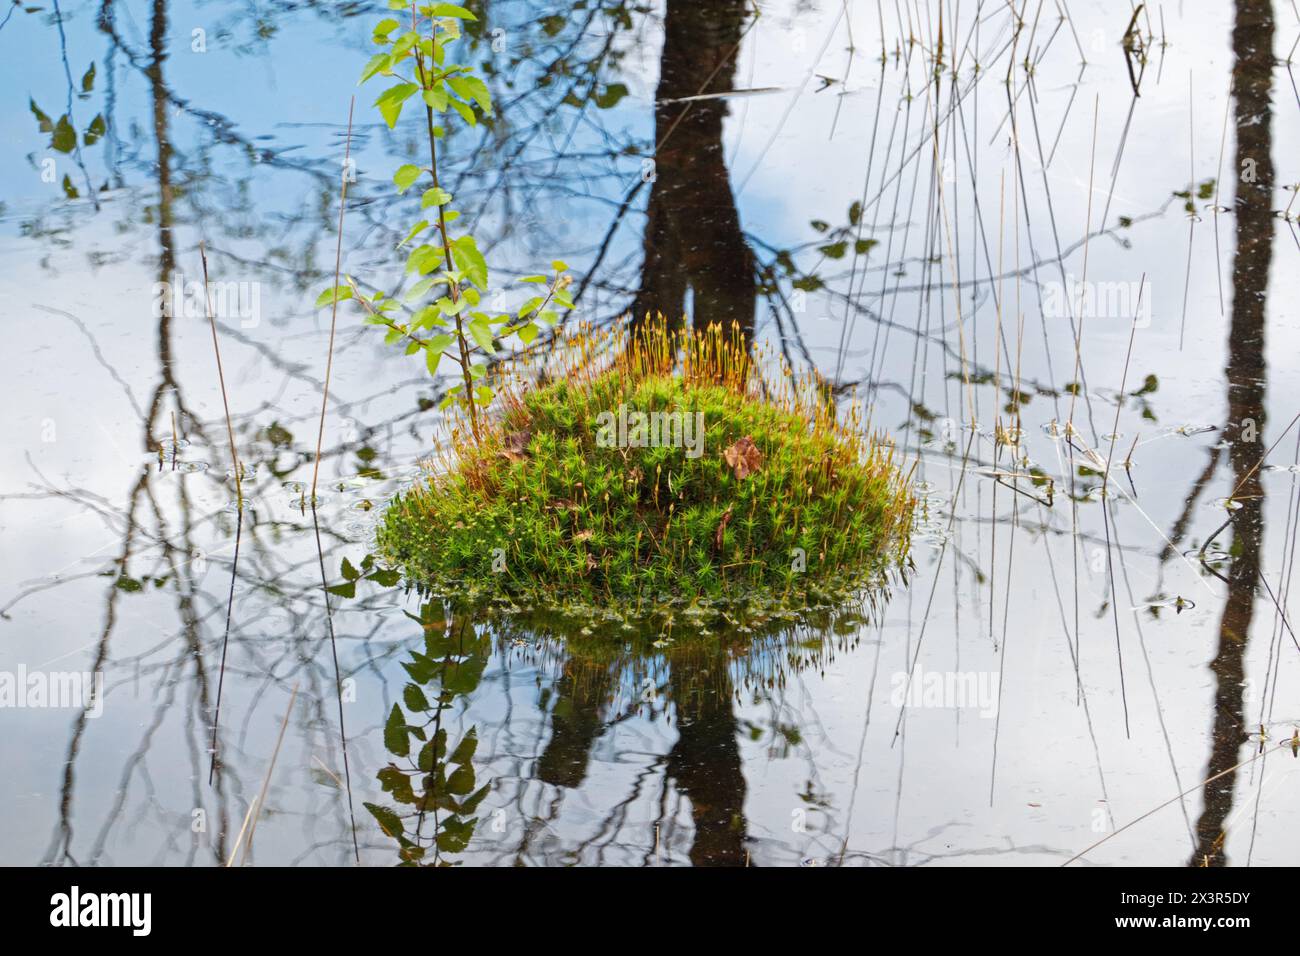 Blooming Bank haircap moss forming a small island in a swamp, refected in water. Stock Photo